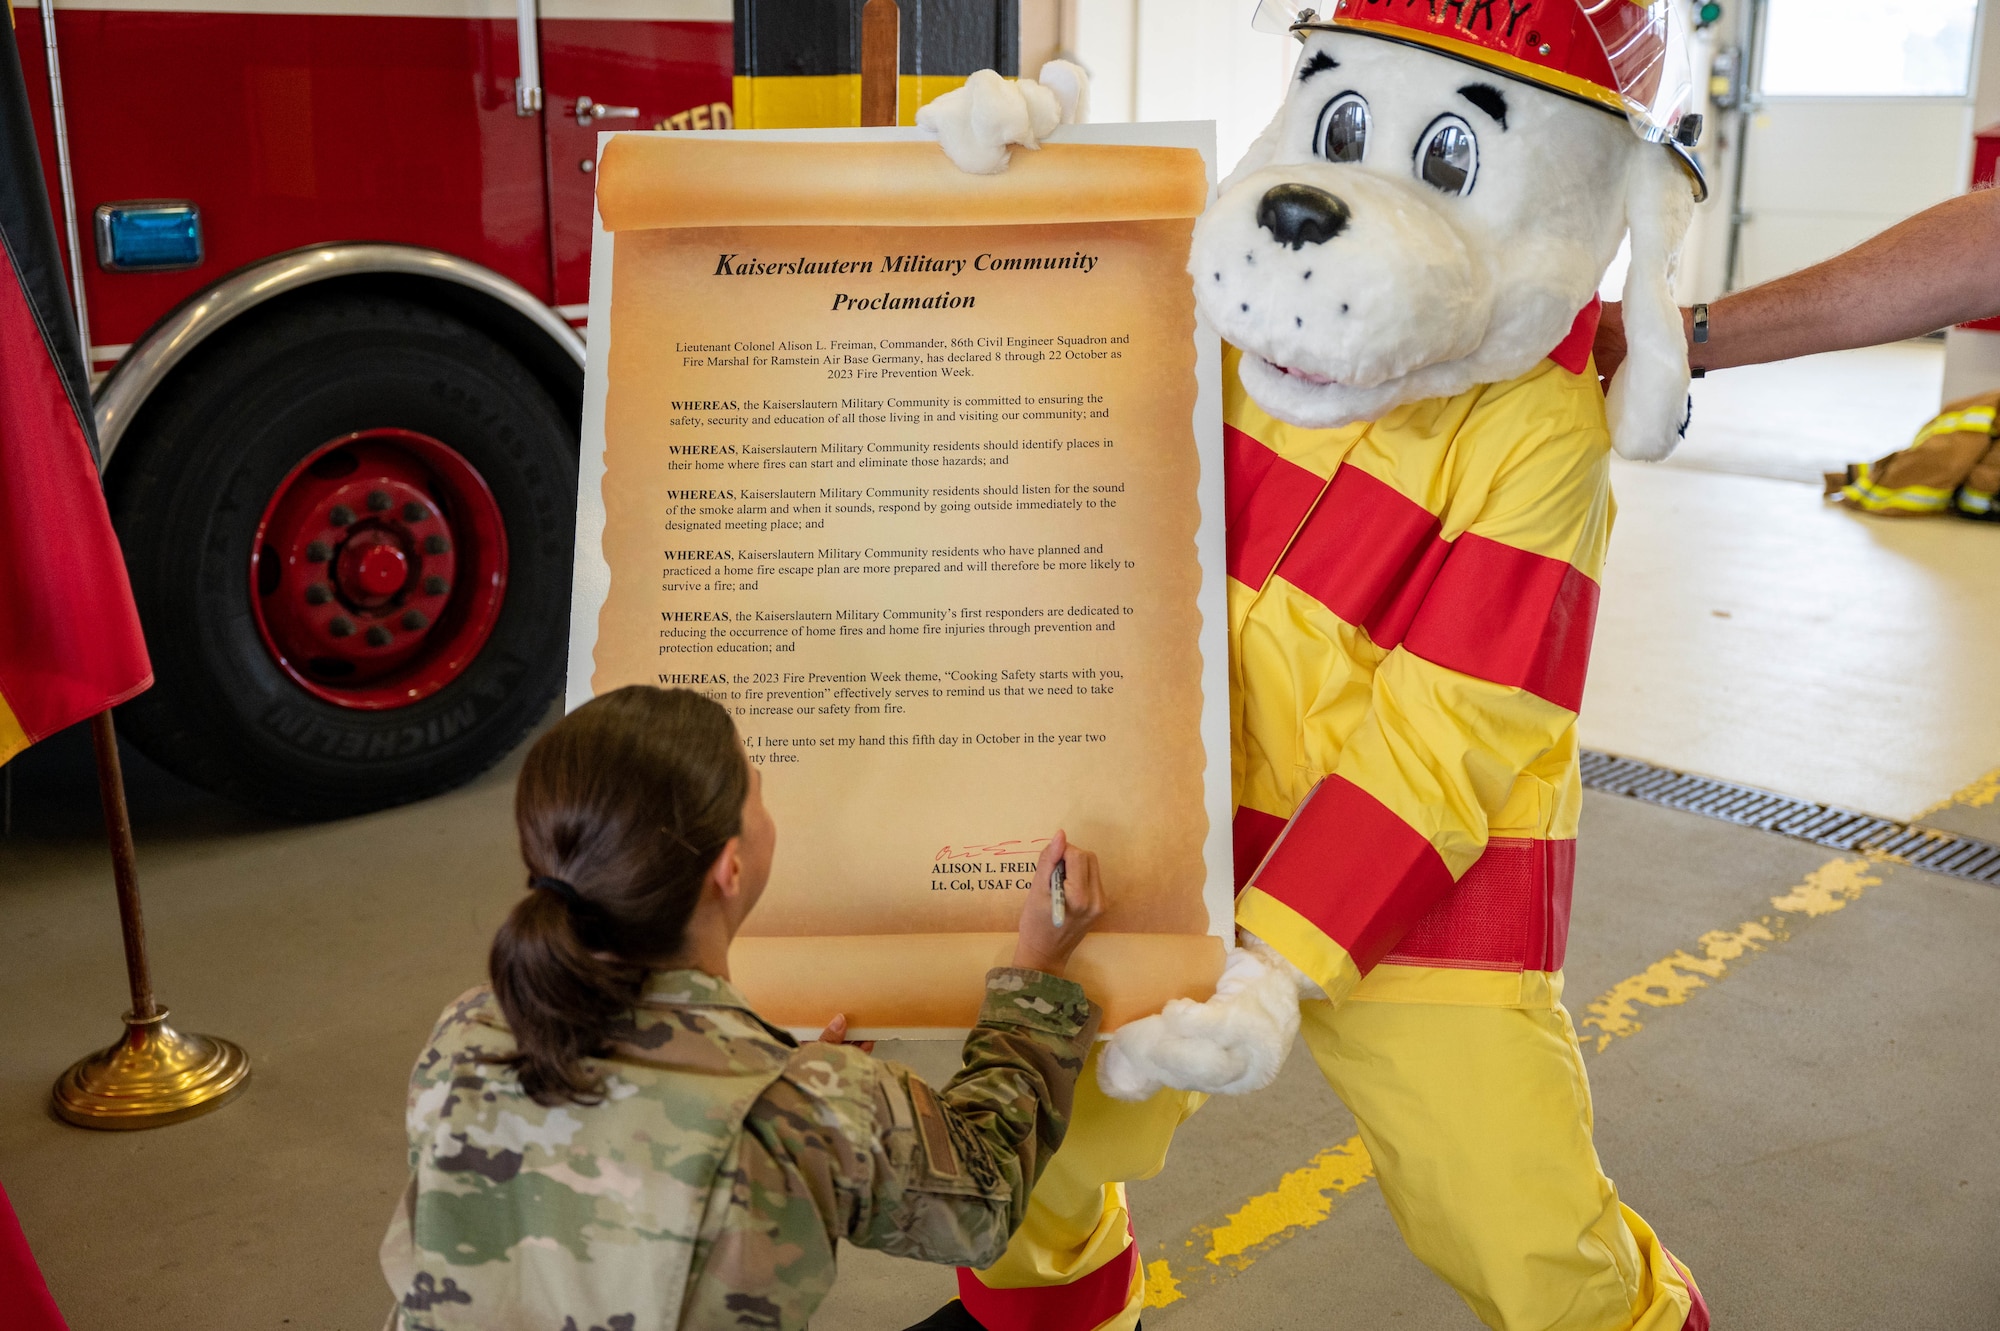 Commander signs the Kaiserslautern Military Community Proclamation poster.